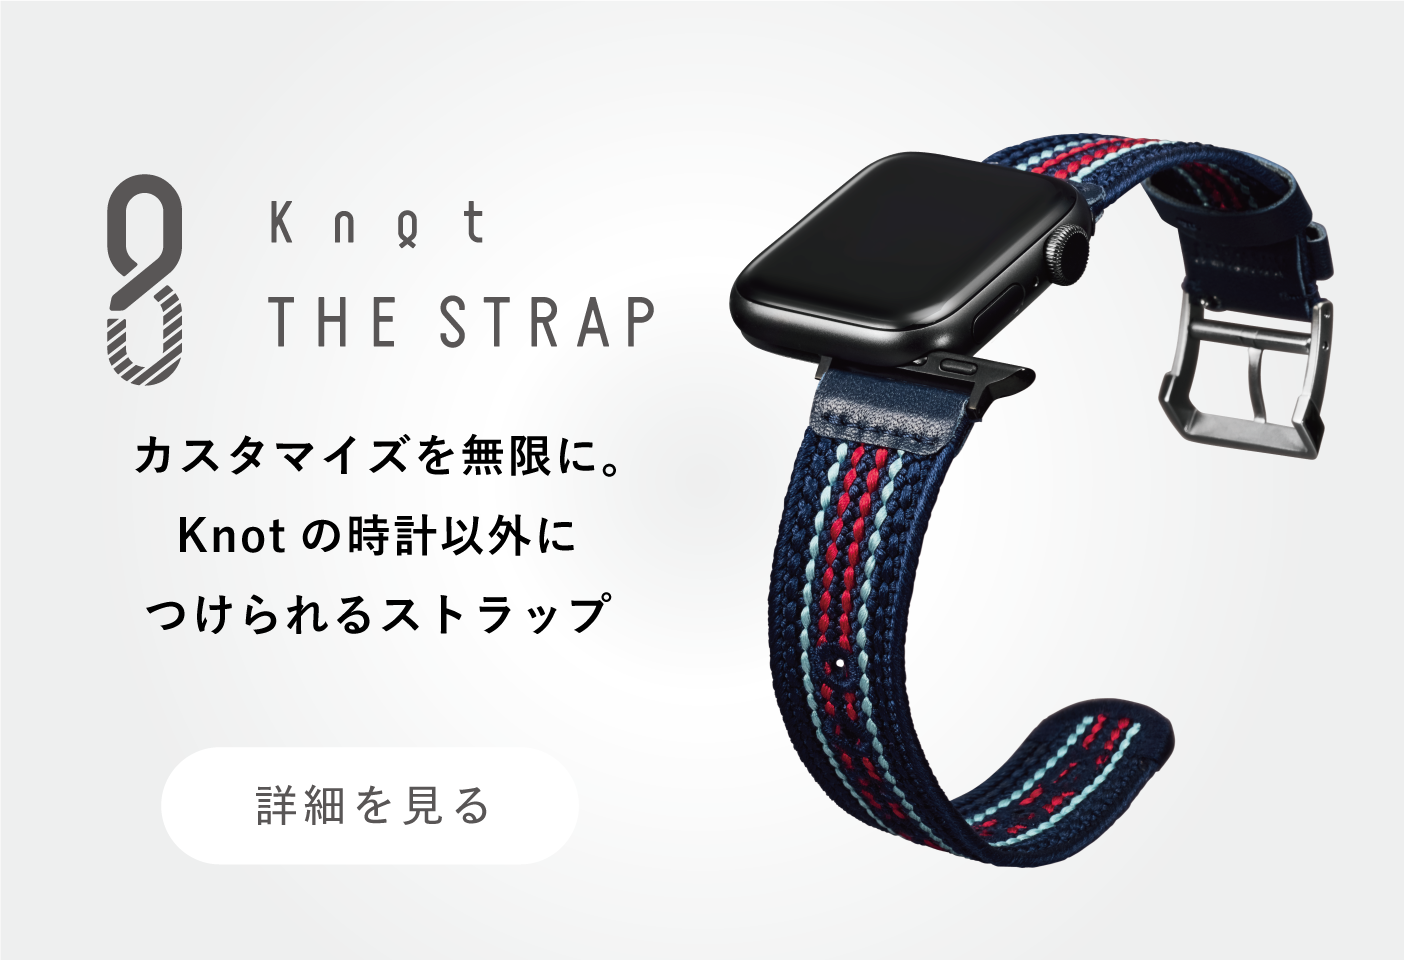 Knot THE STRAPバナー